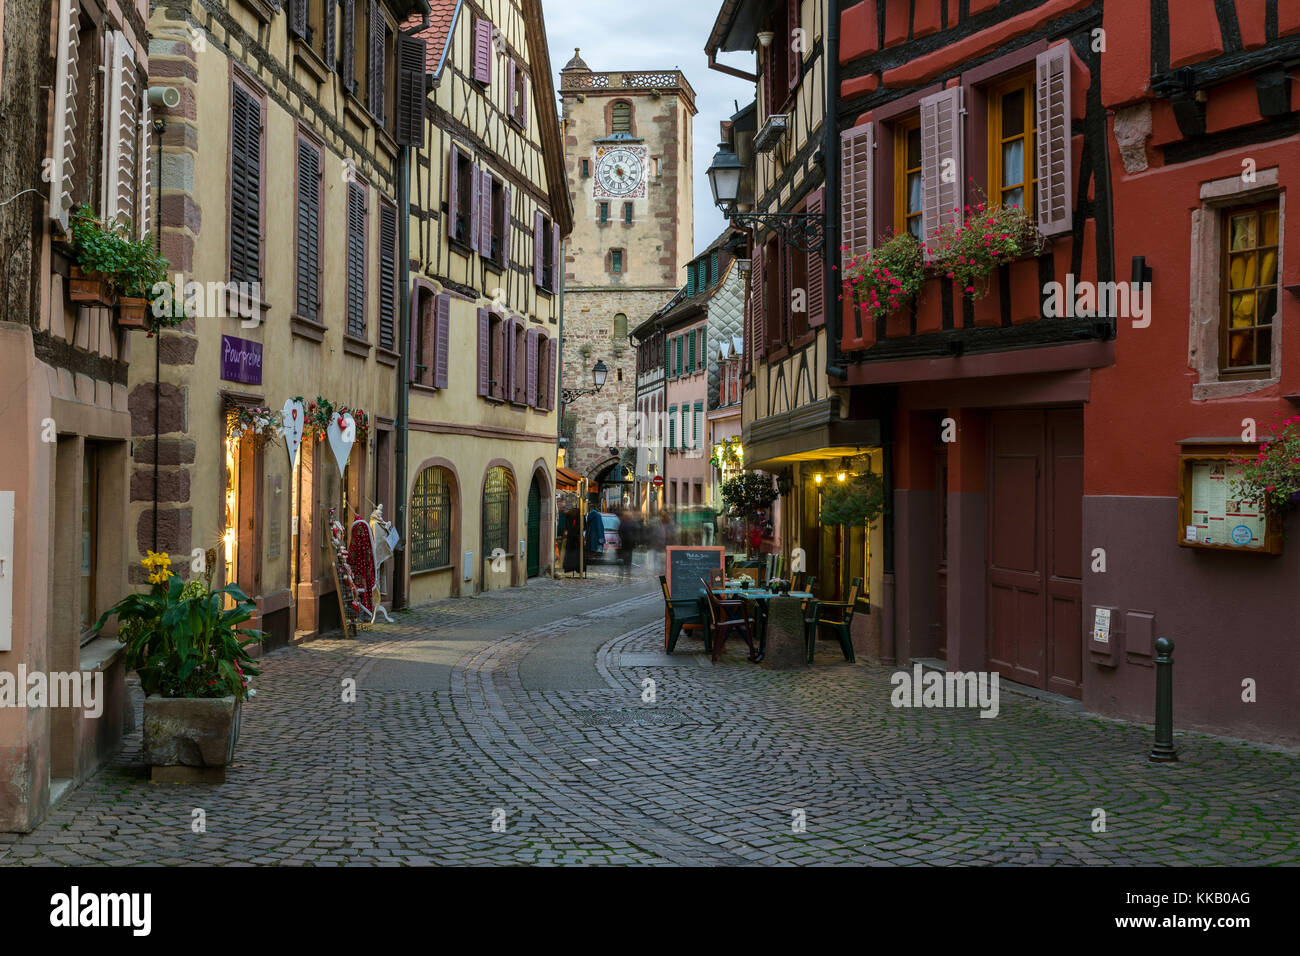 Grand Rue with butcher's tower, Tour des Bouchers, Ribeauville, Alsace wine route, Alsace, Haut-Rhin department, France Stock Photo